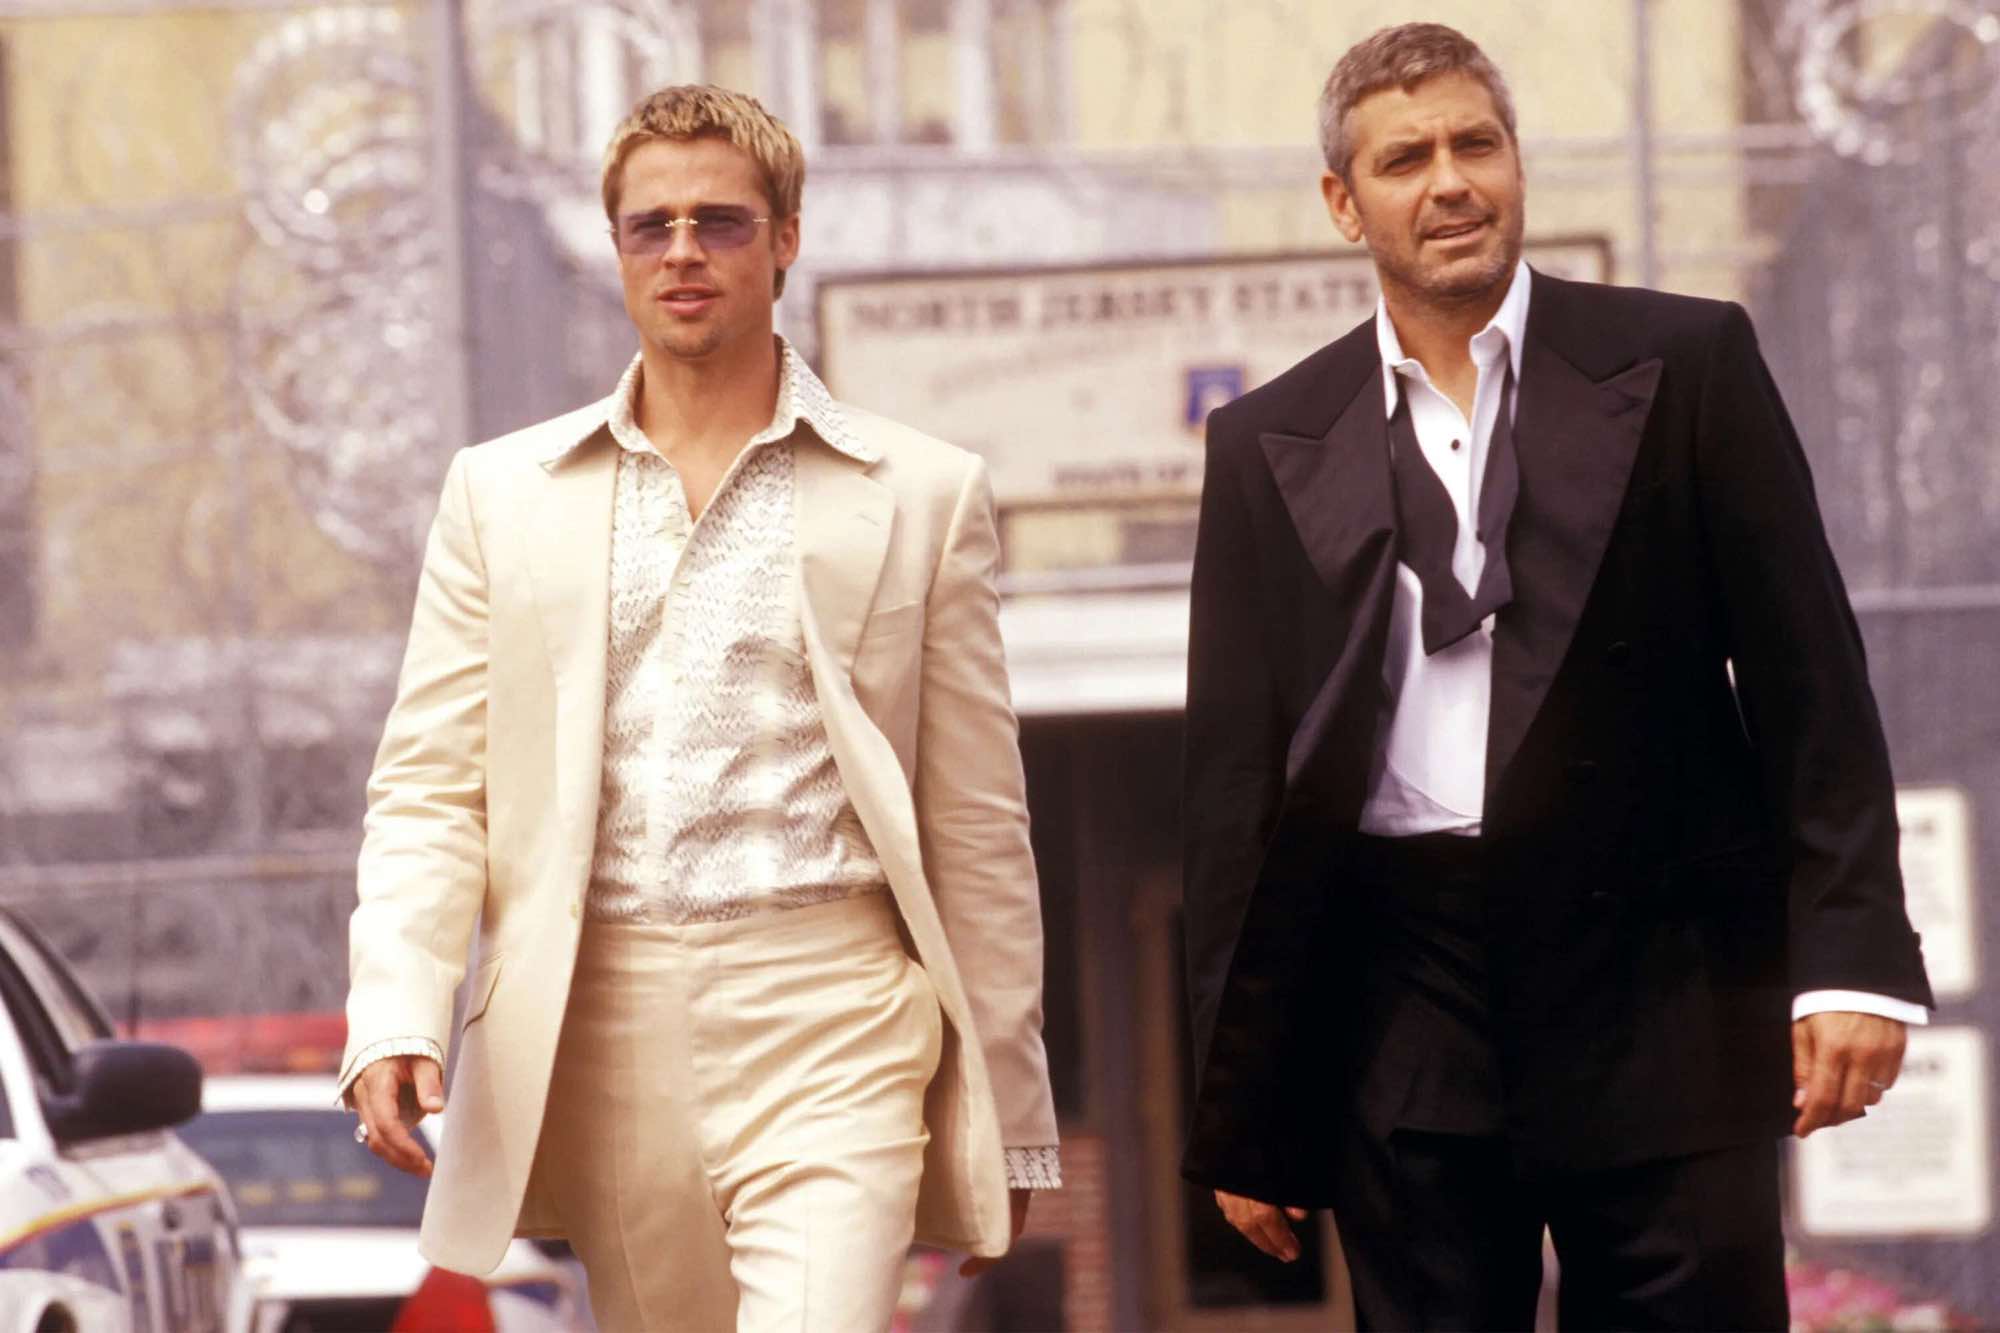 Uncover the facts behind Hollywood's golden boy duo: do Brad Pitt's charms boost George Clooney's net worth? Or is it pure bromantic screenplay magic? Discover more!